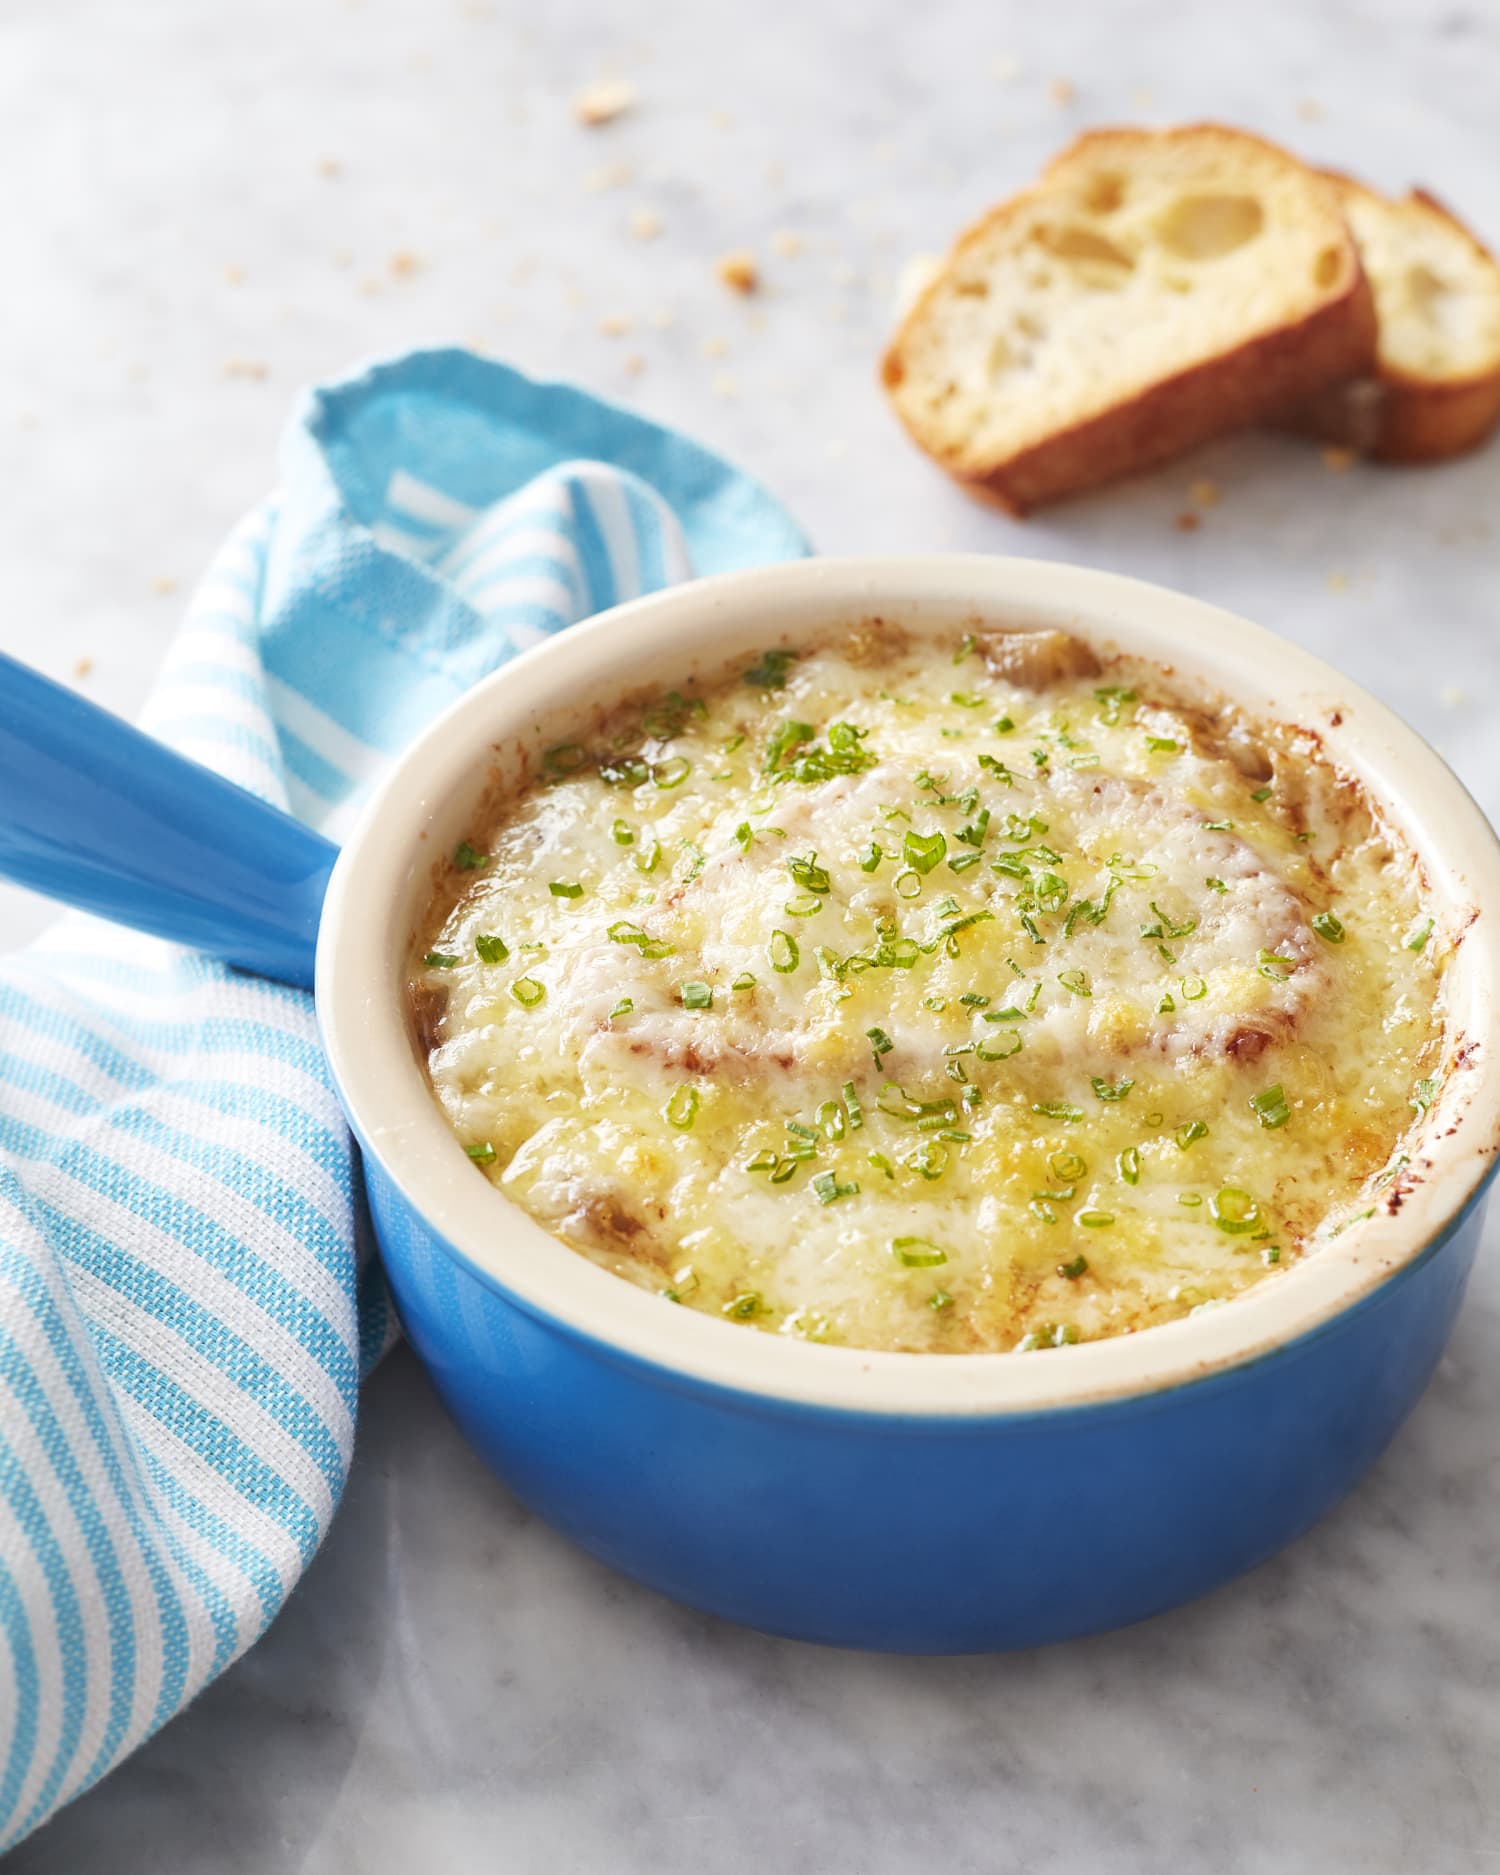 These French Onion Soup-Stuffed Buns Are the Upgrade to the Classic Comfort Food You Need to Try